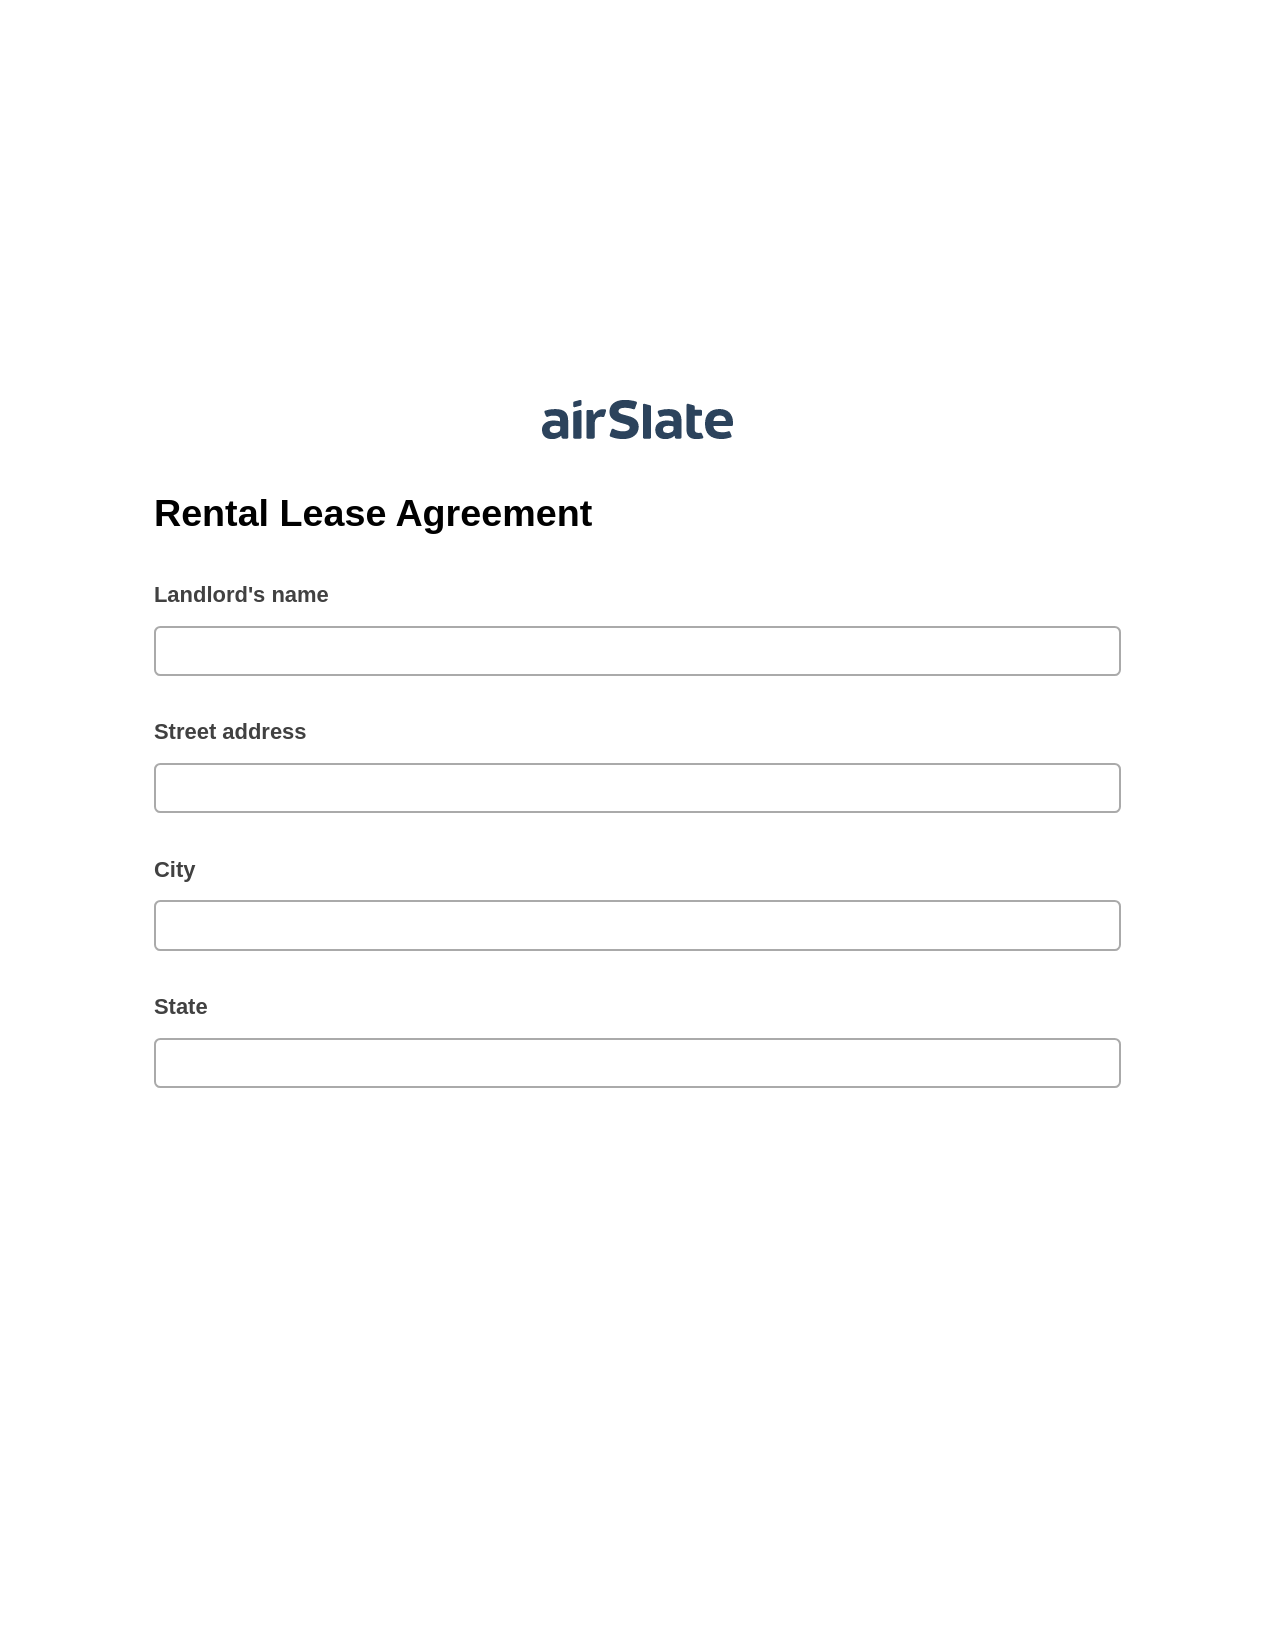 Multirole Rental Lease Agreement Pre-fill from Excel Spreadsheet Dropdown Options Bot, Invoke Salesforce Process Bot, Post-finish Document Bot